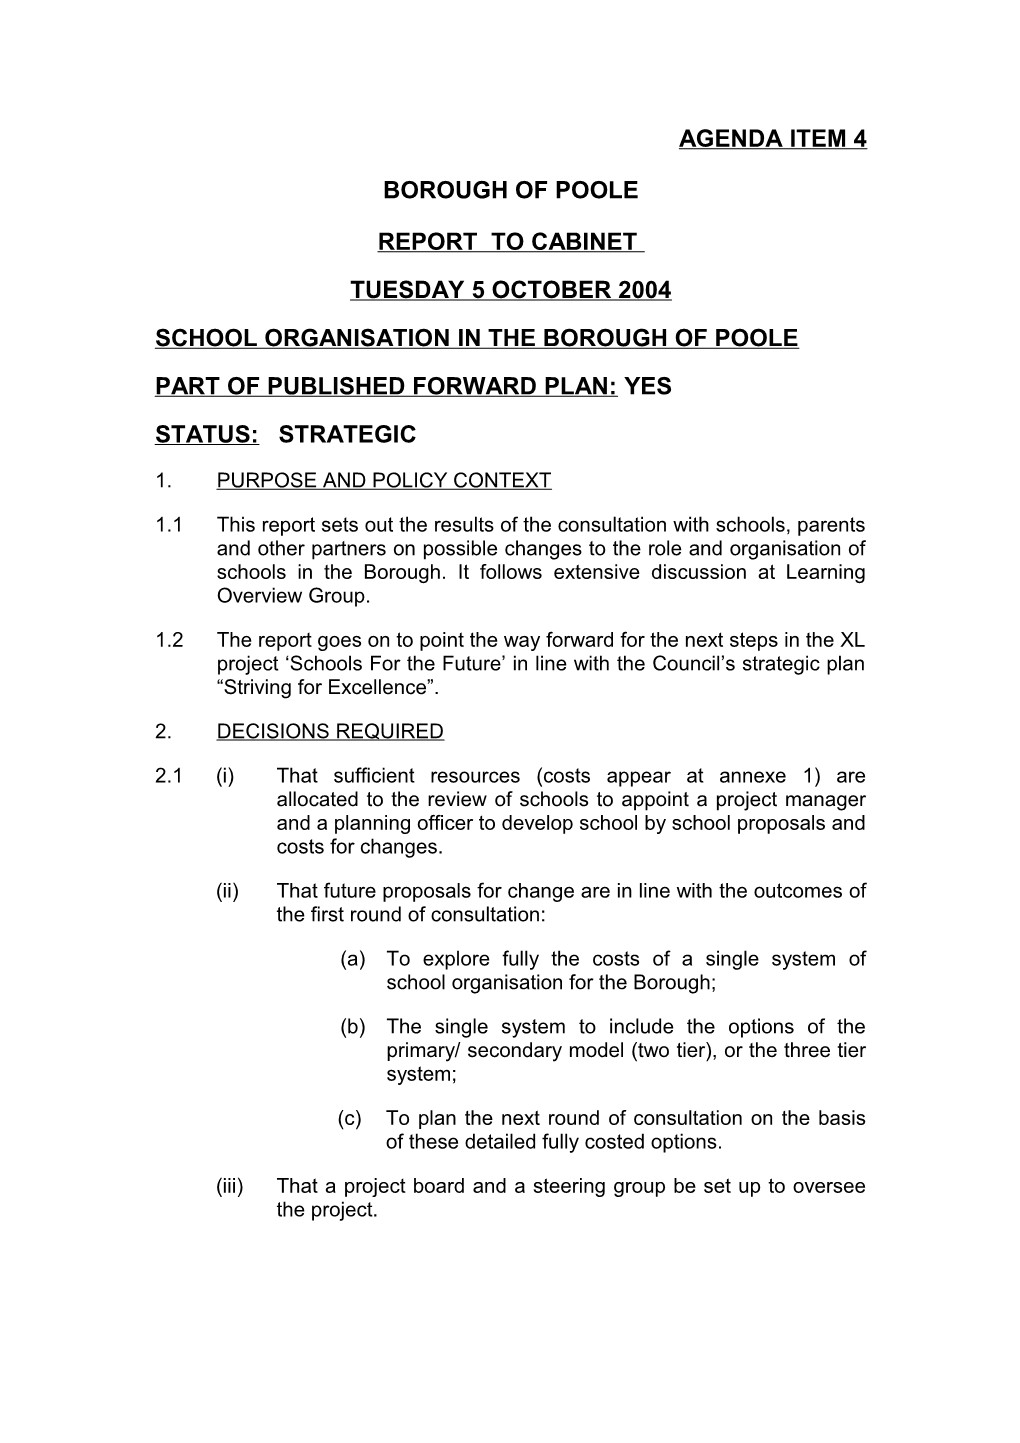 School Organisation in the Borough of Poole